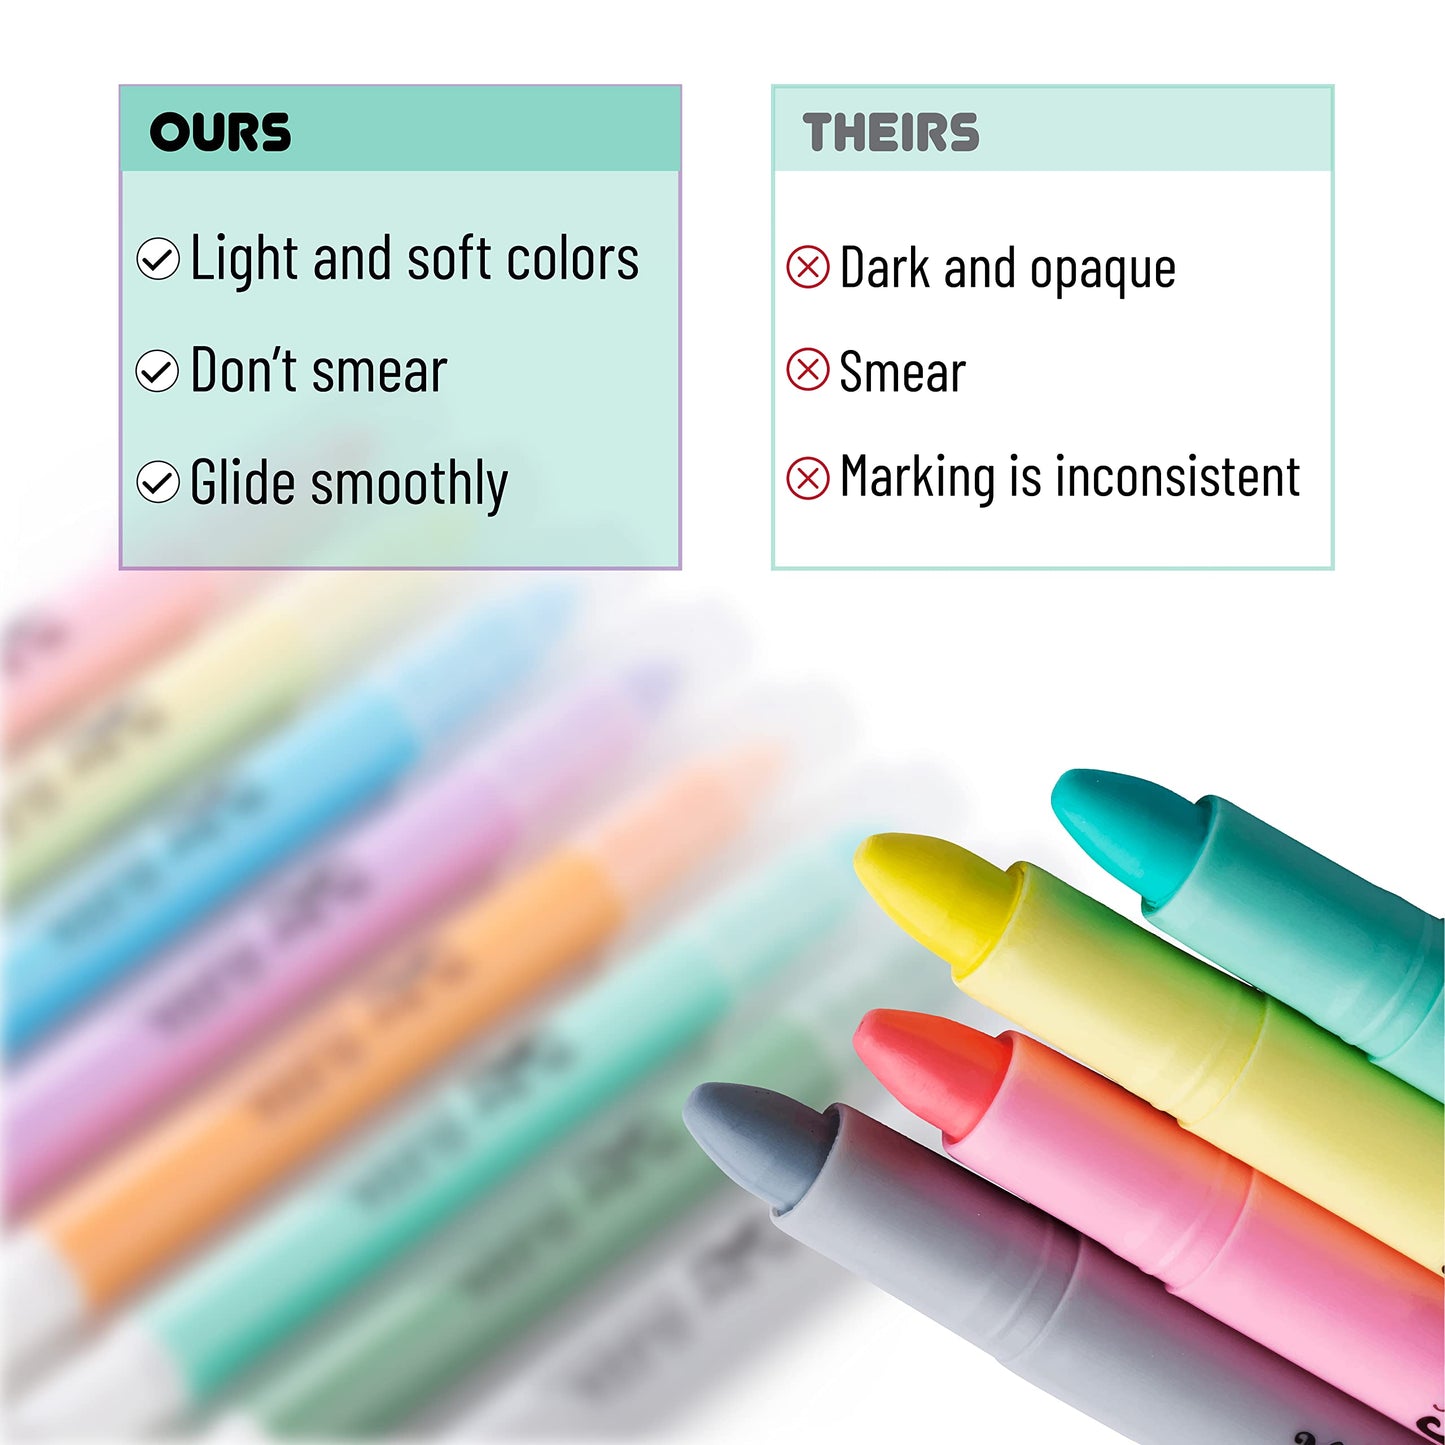 Mr. Pen- Bible Highlighters, Pastel Gel 8 Pack, Assorted Colors, Highlighters No Bleed, Highlighter, Highlighter Set, Dry Markers